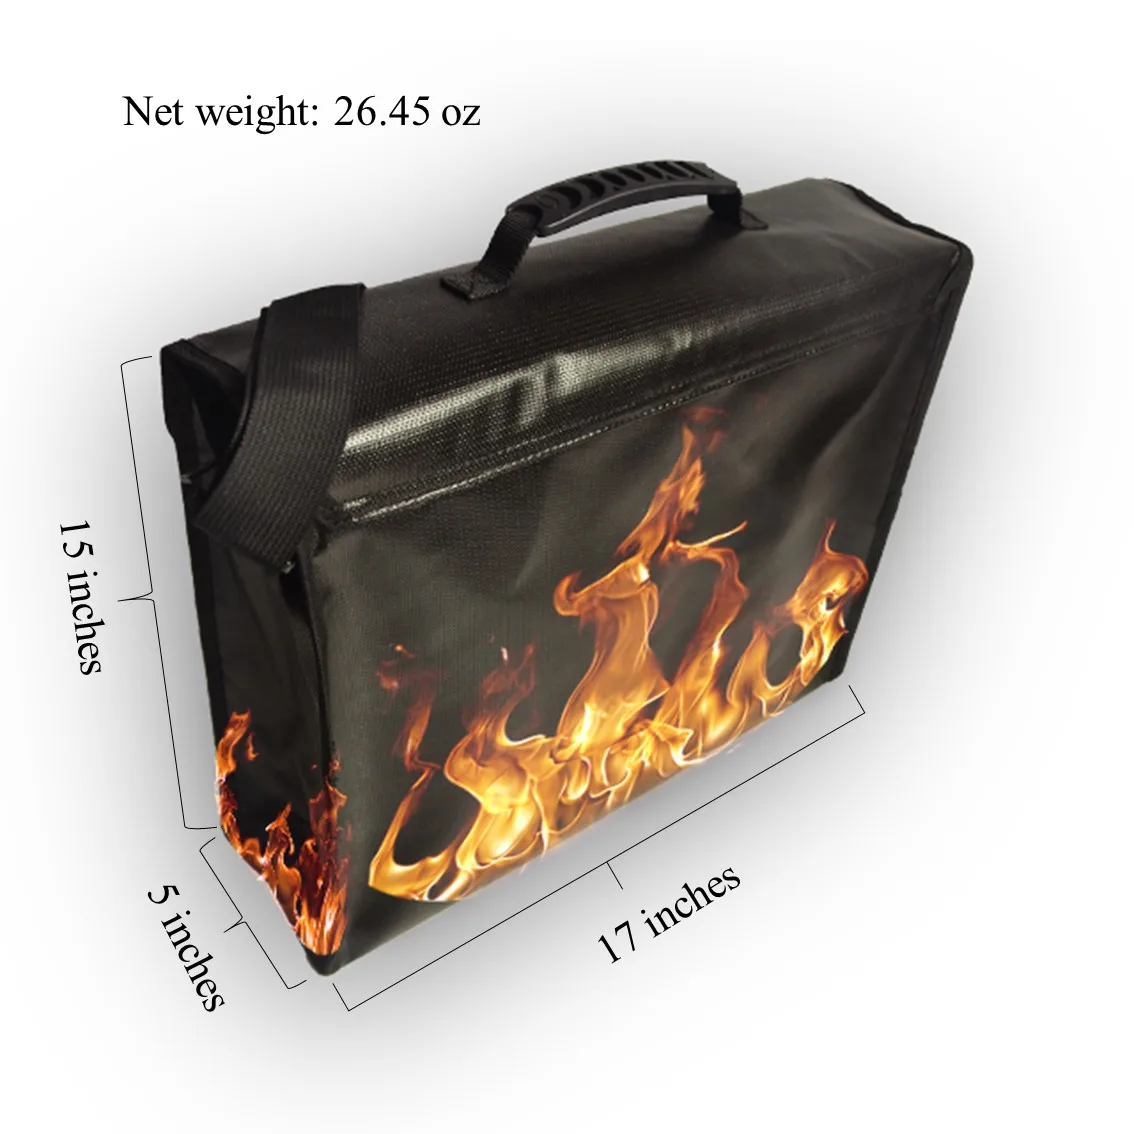 fire retardant fireproof bag document file security for computer documents money important bills